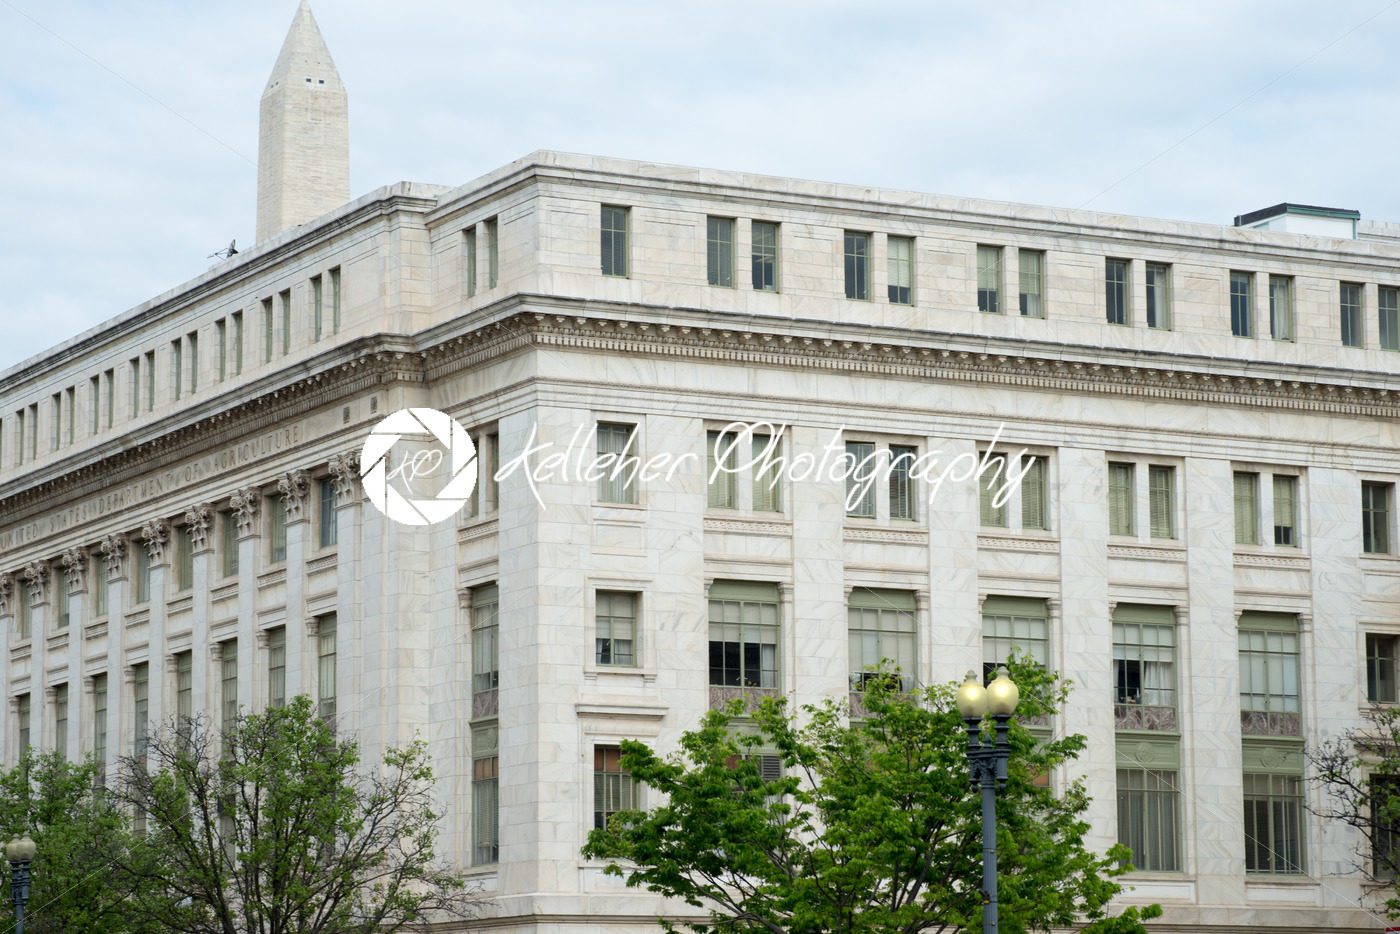 WASHINGTON, DISTRICT OF COLUMBIA – APRIL 14: View of the Department of Agriculture Building on April 14, 2017 - Kelleher Photography Store